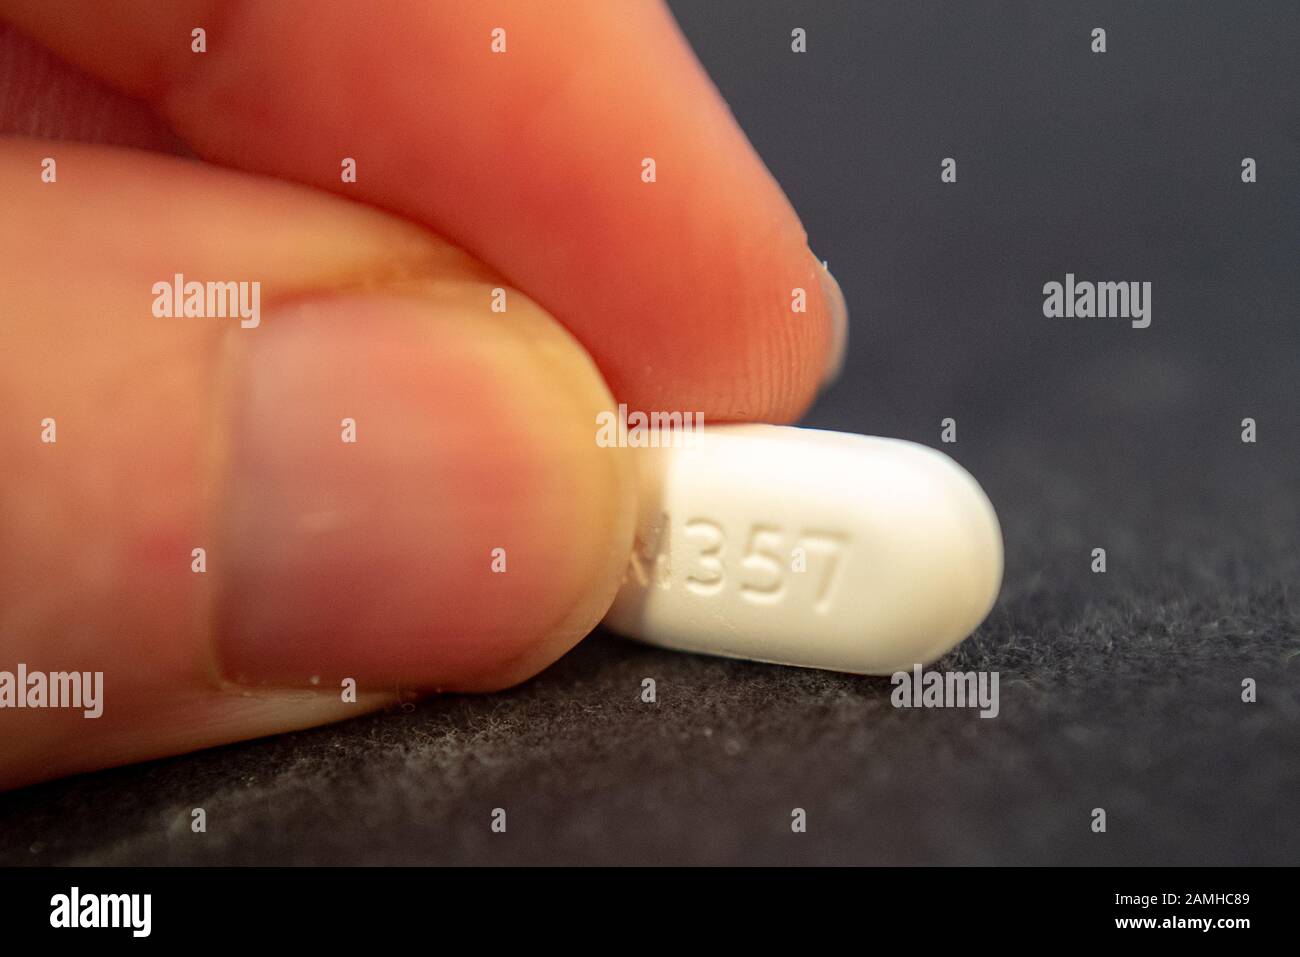 Illustrative image, close-up of hand of a man holding a pill of the combination narcotic opioid pain medication hydrocodone 5-acetaminophen 500, marketed under the trade names Vicodin or Lortab, San Ramon, California, December 10, 2019. Many regulators and lawmakers are focusing on the opioid crisis in the United States, which has led to addiction and illegal drug use. () Stock Photo